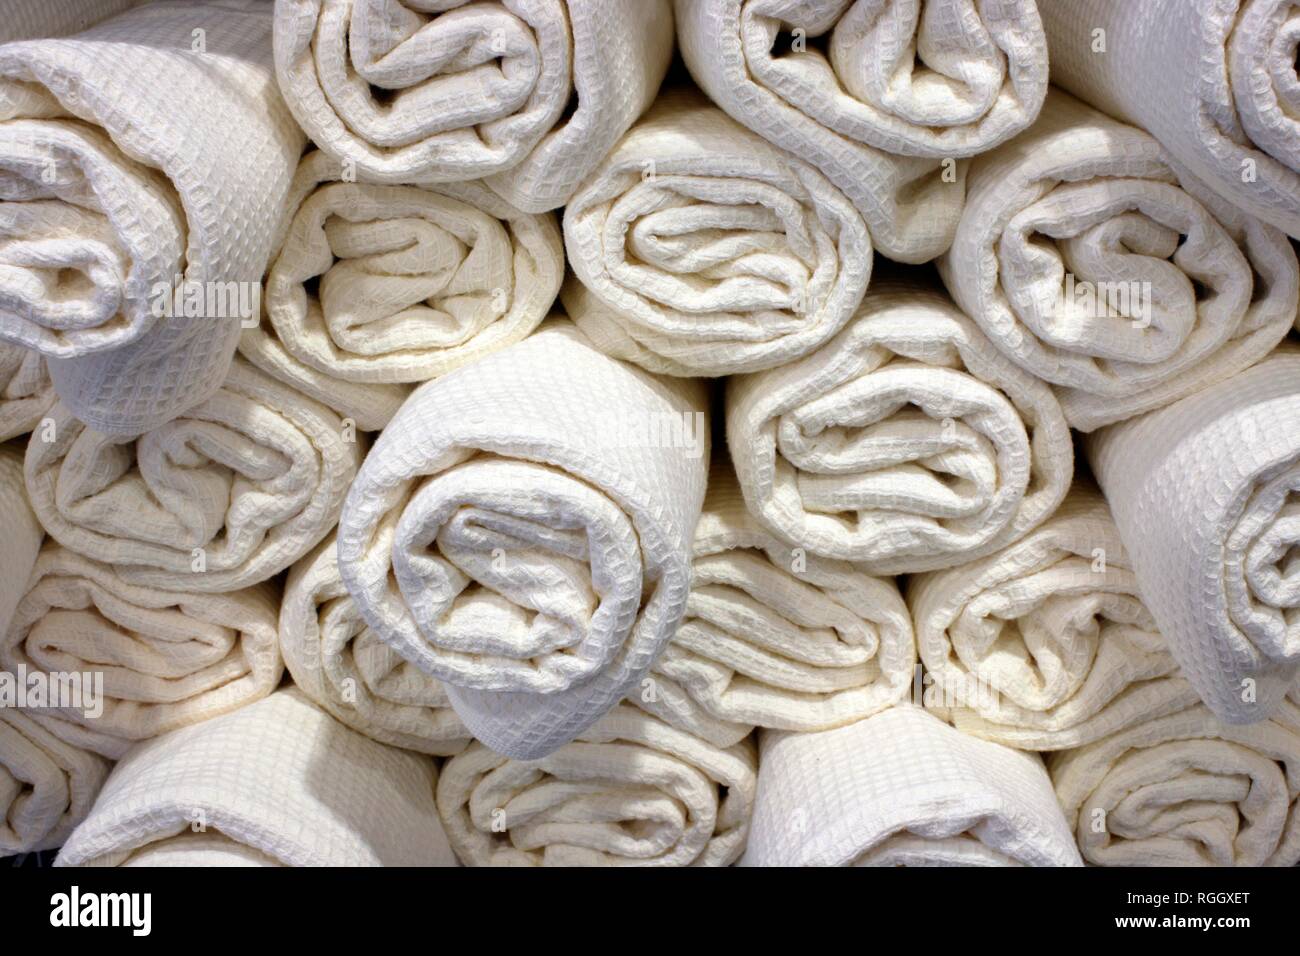 Wellness, rolled white towels, Germany Stock Photo